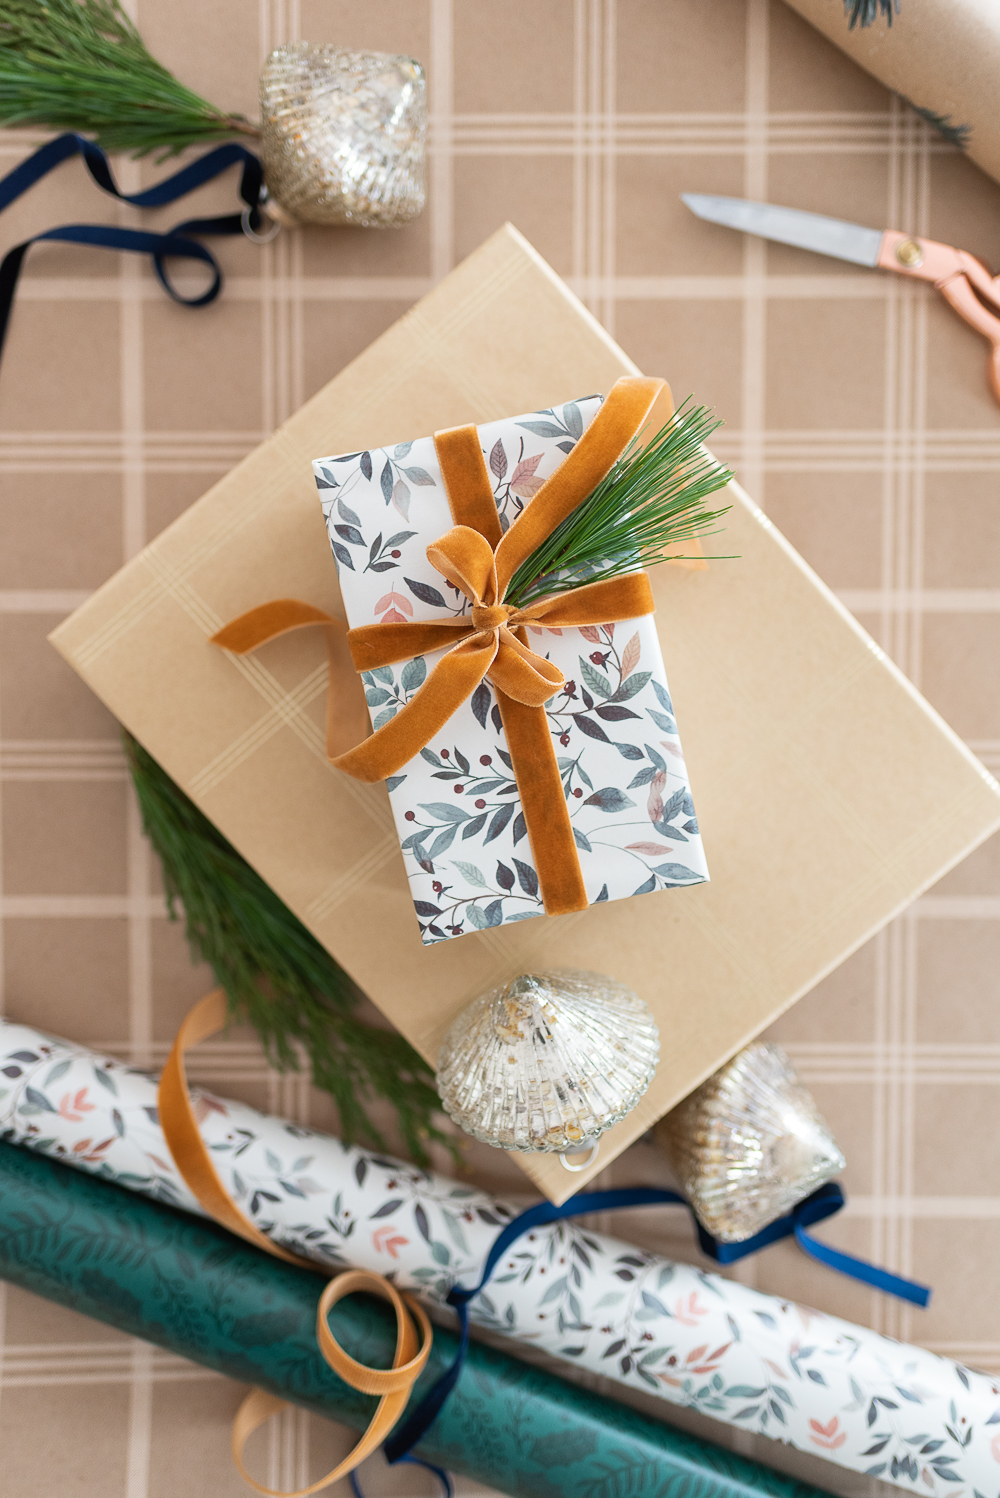 Prep In Your Step: That's A Wrap - Cute Holiday Wrapping Paper